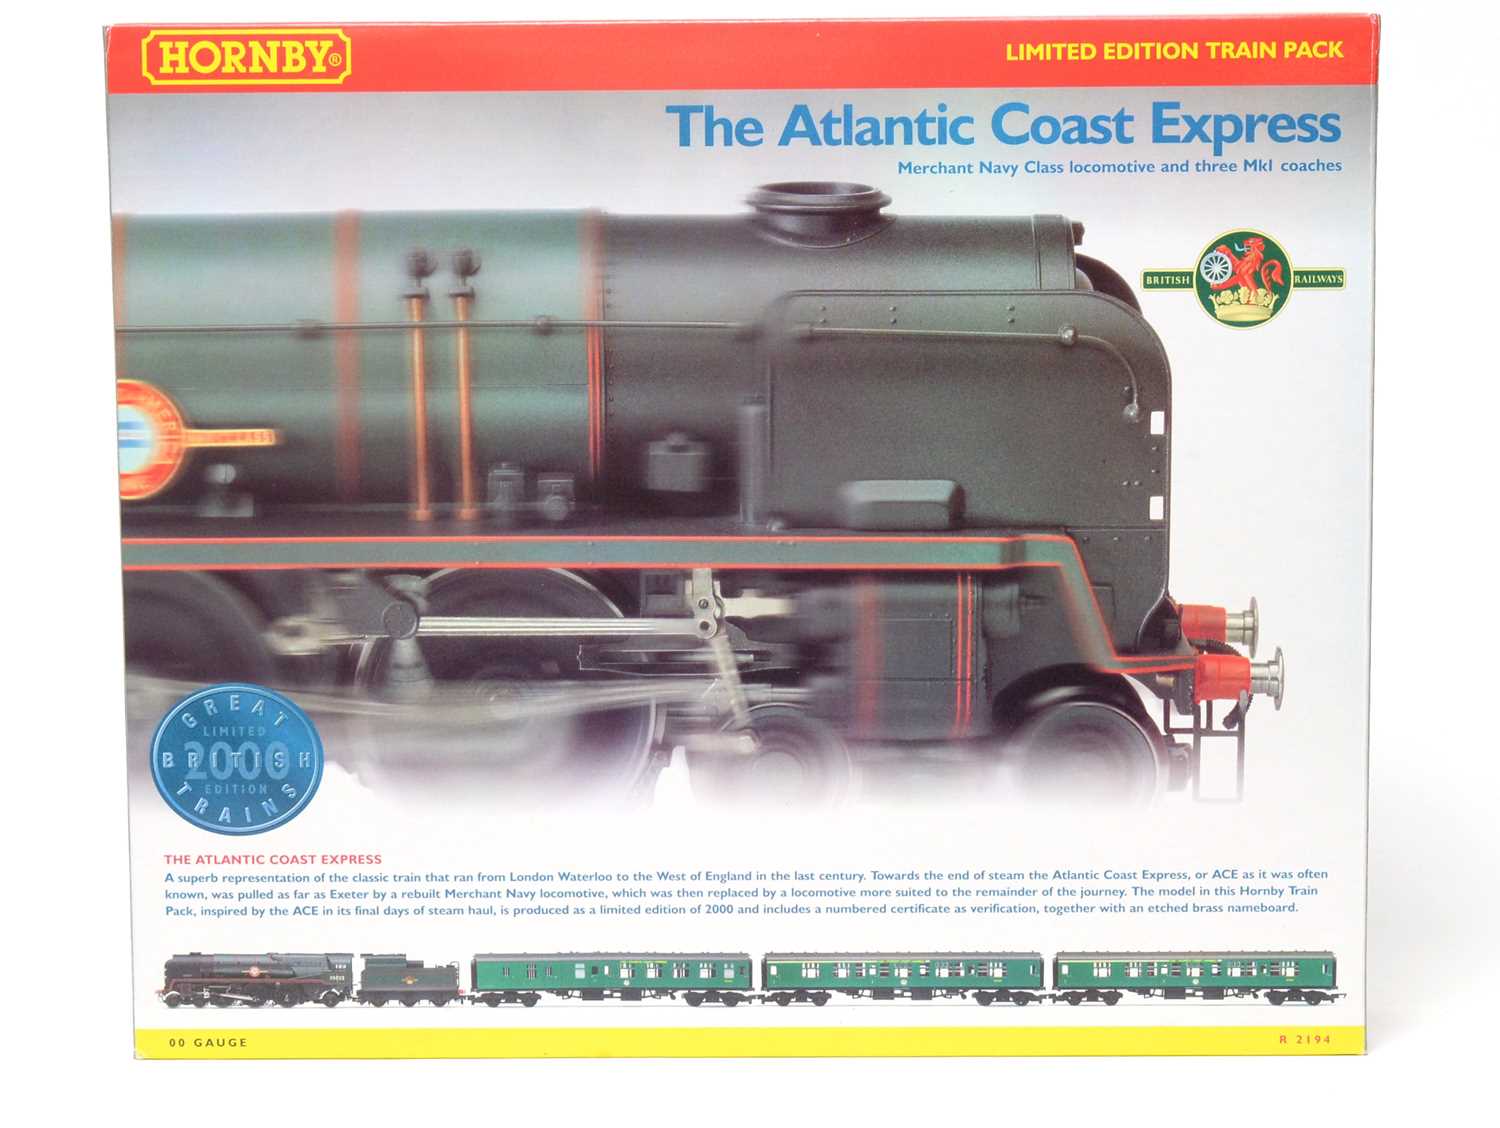 Lot 655 - Hornby Limited Edition Train pack, No. R2194.